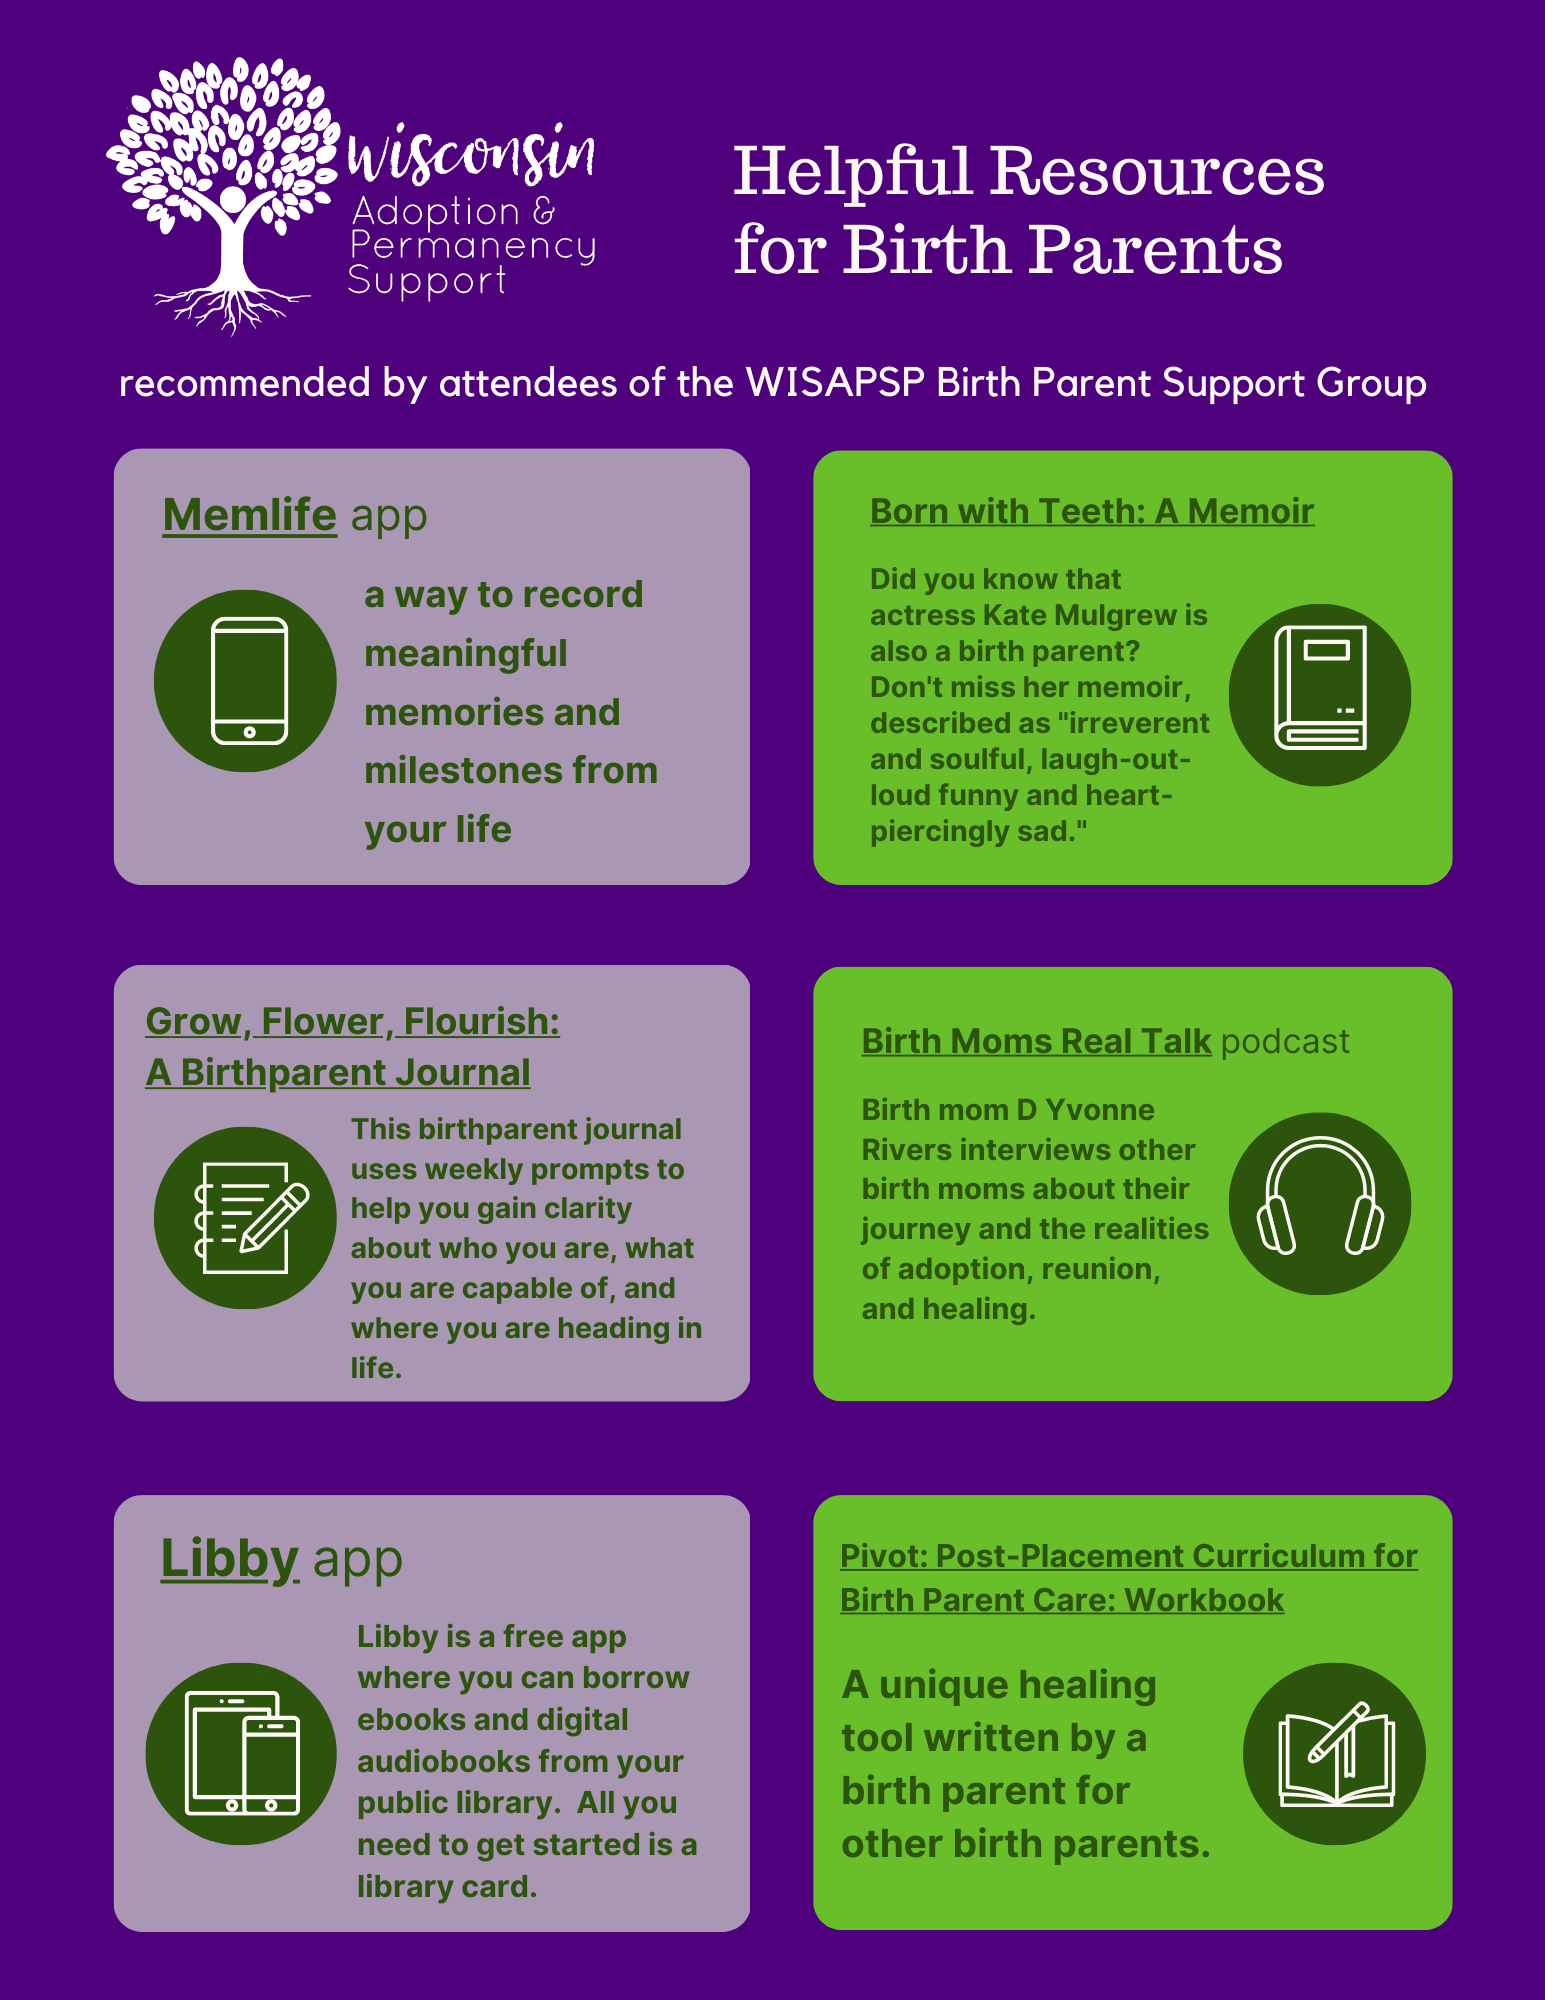 Helpful Resources for Birth Parents